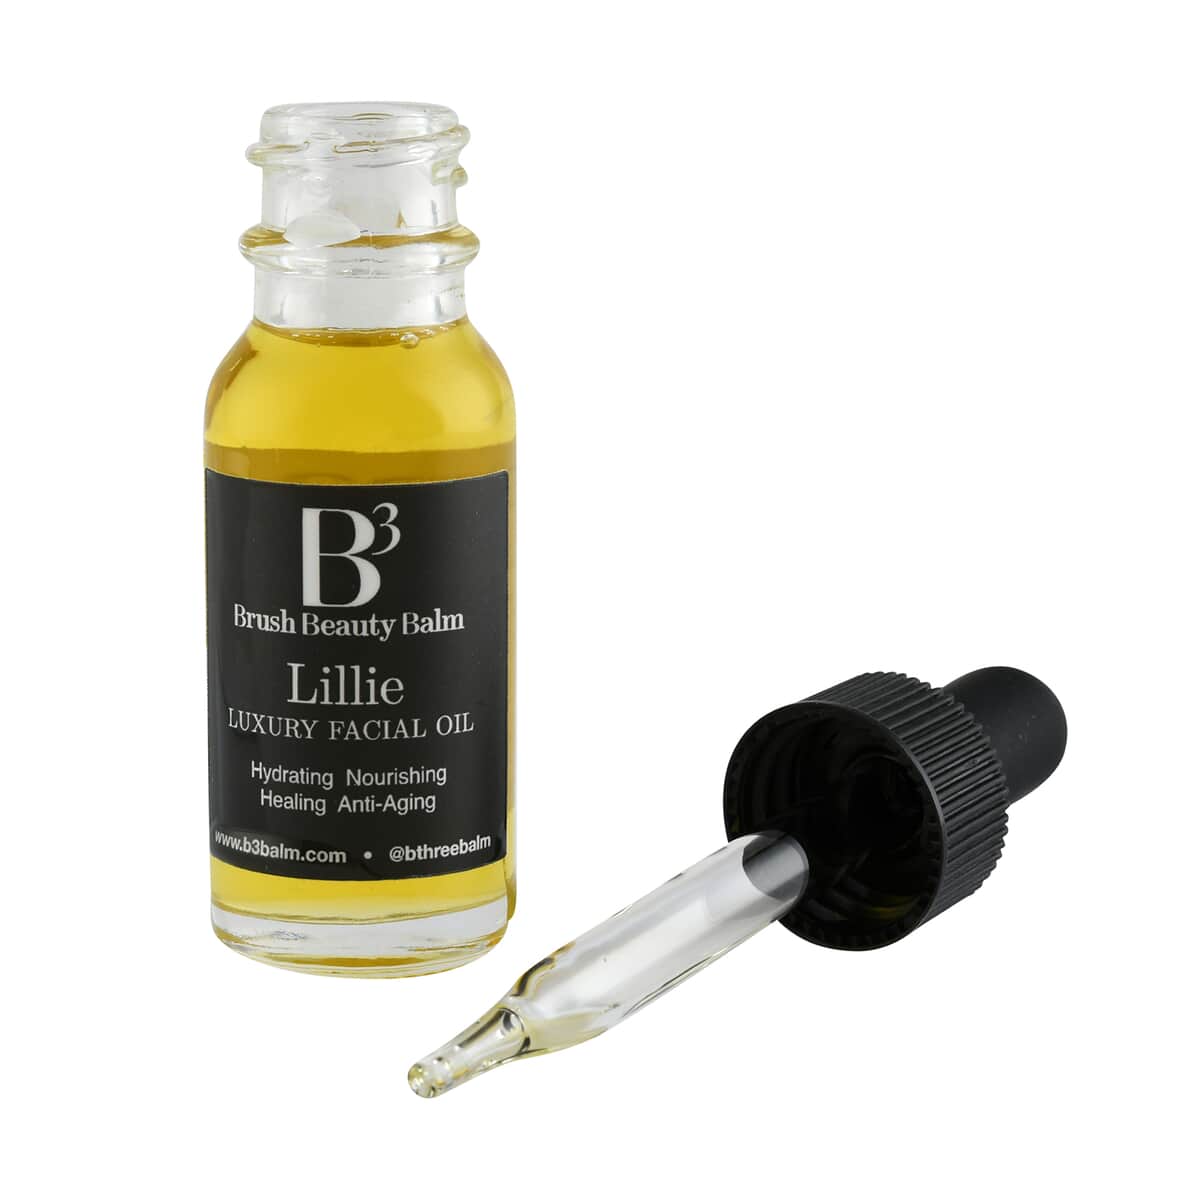 B3 Balm Lillie Luxury Face Oil 0.5 oz image number 2